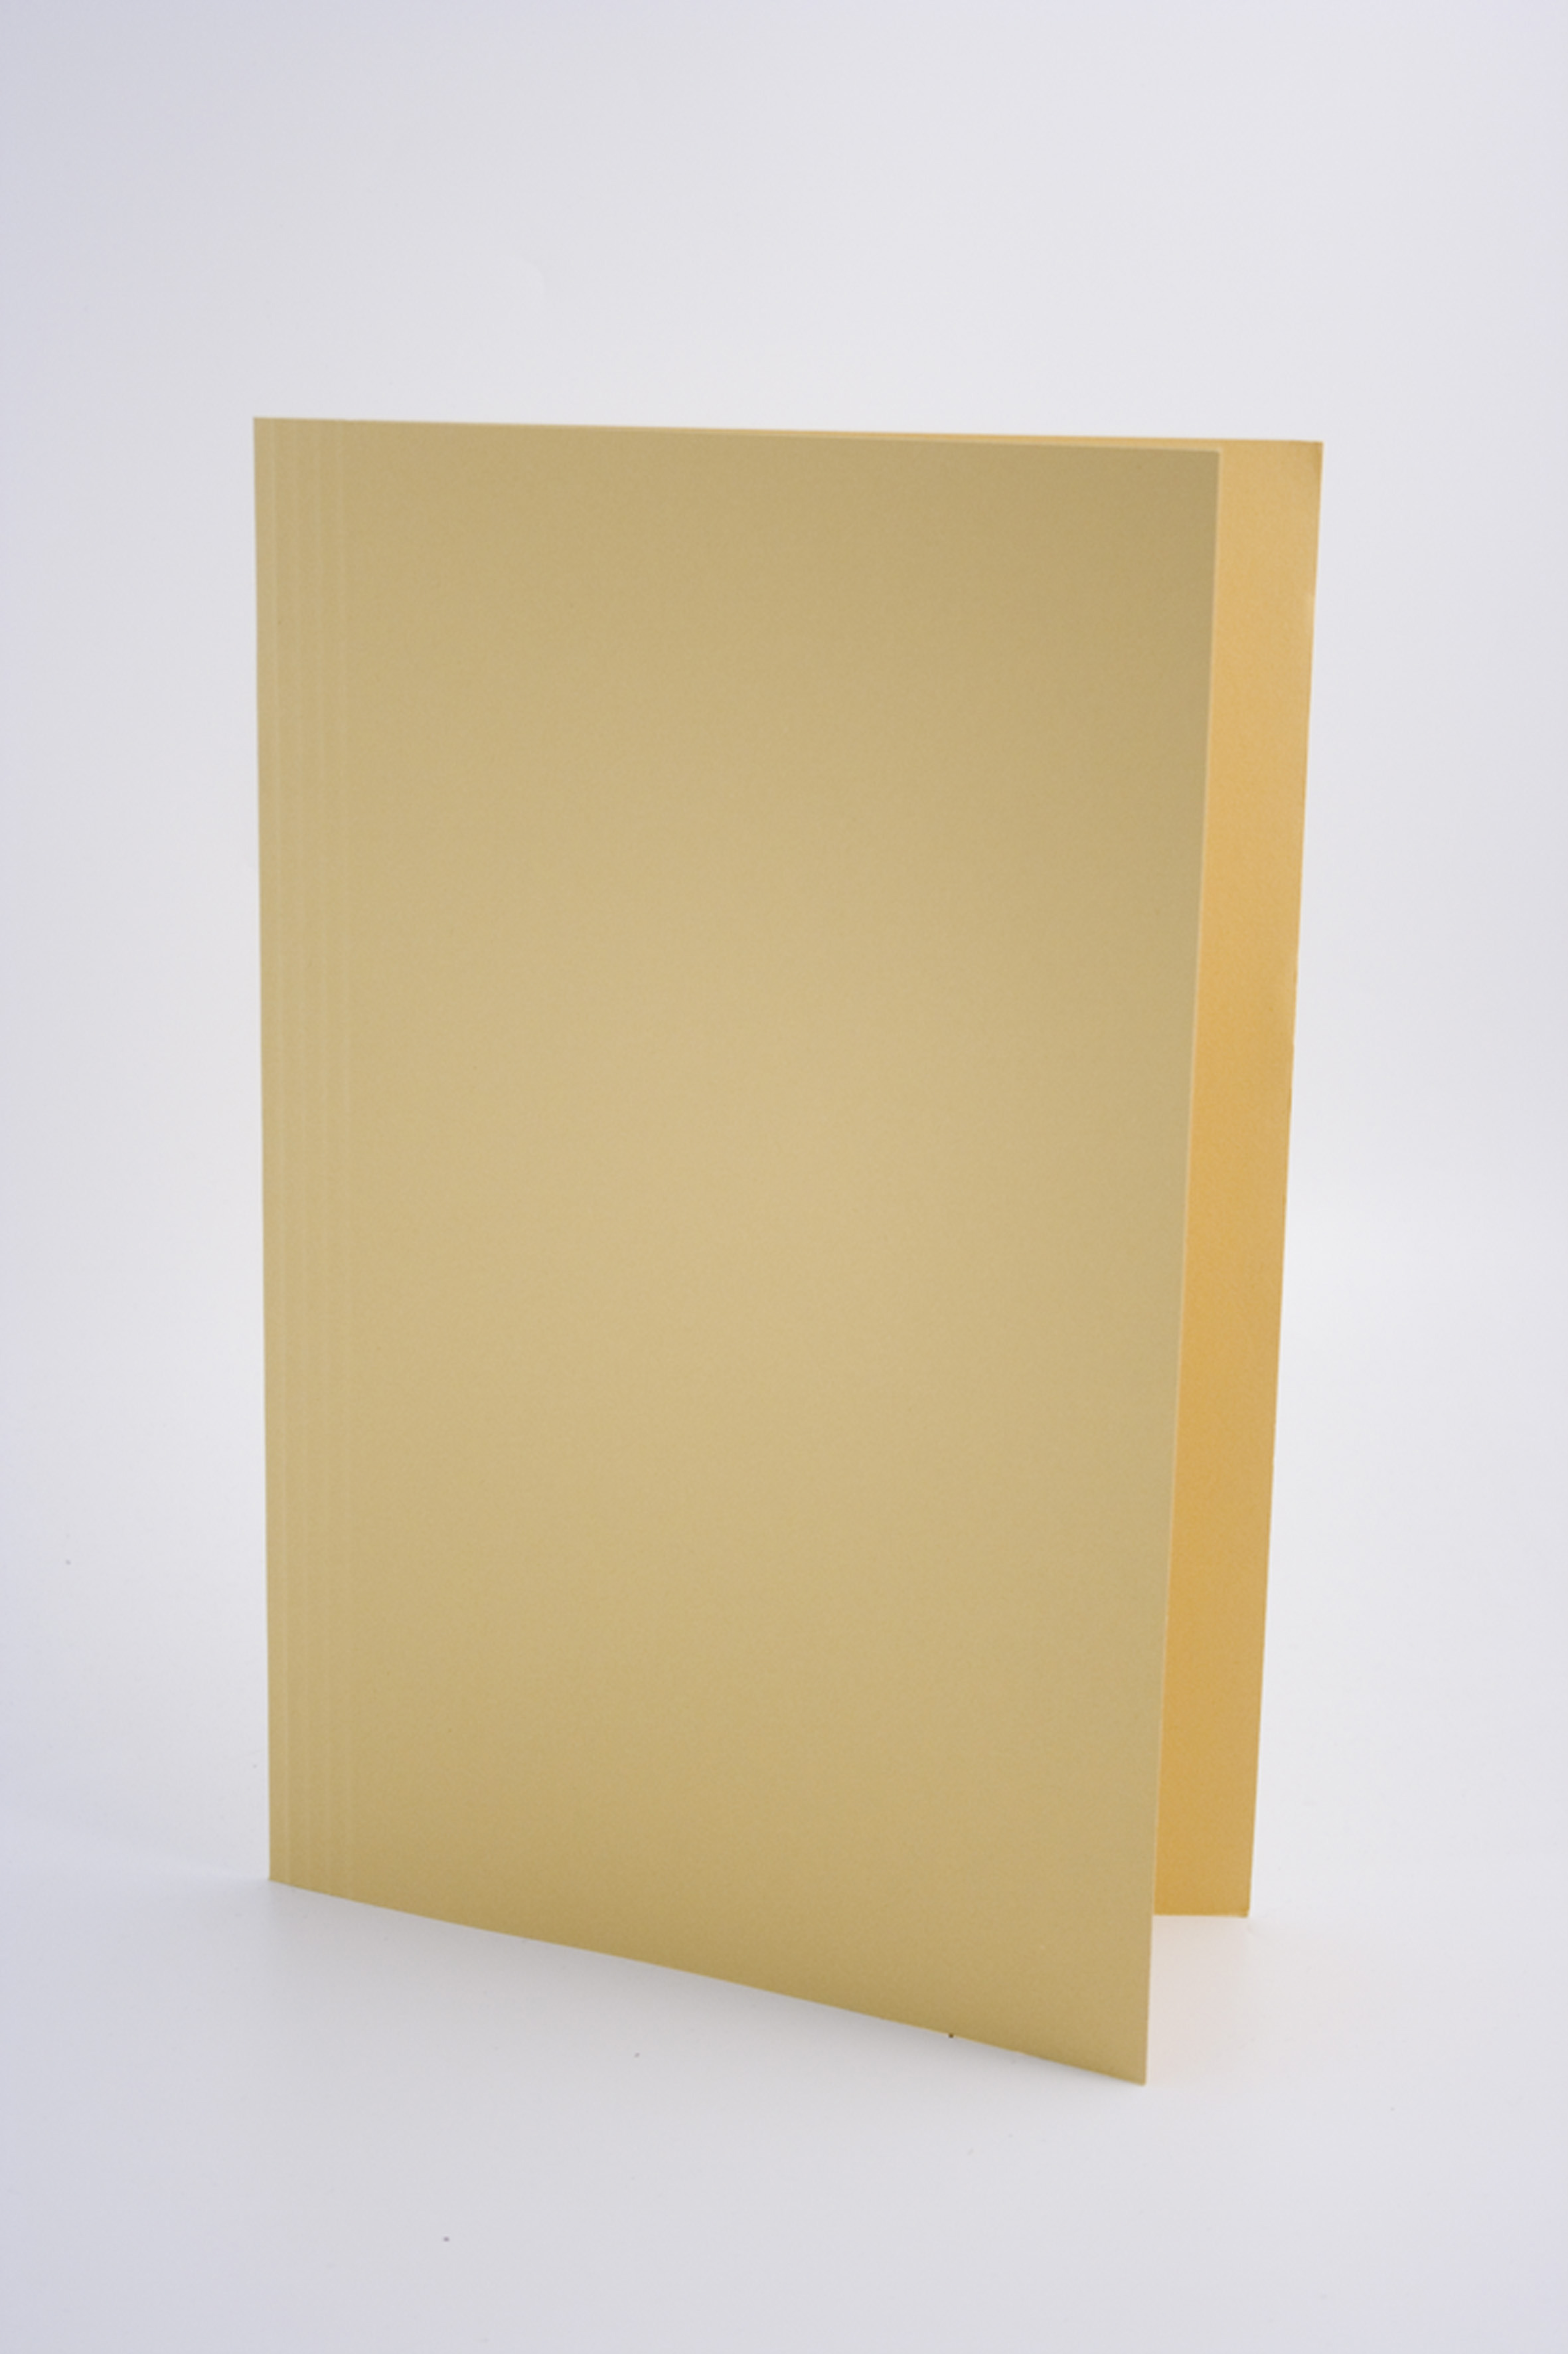 Guildhall Square Cut Folder Manilla Foolscap 250gsm Yellow (Pack 100)